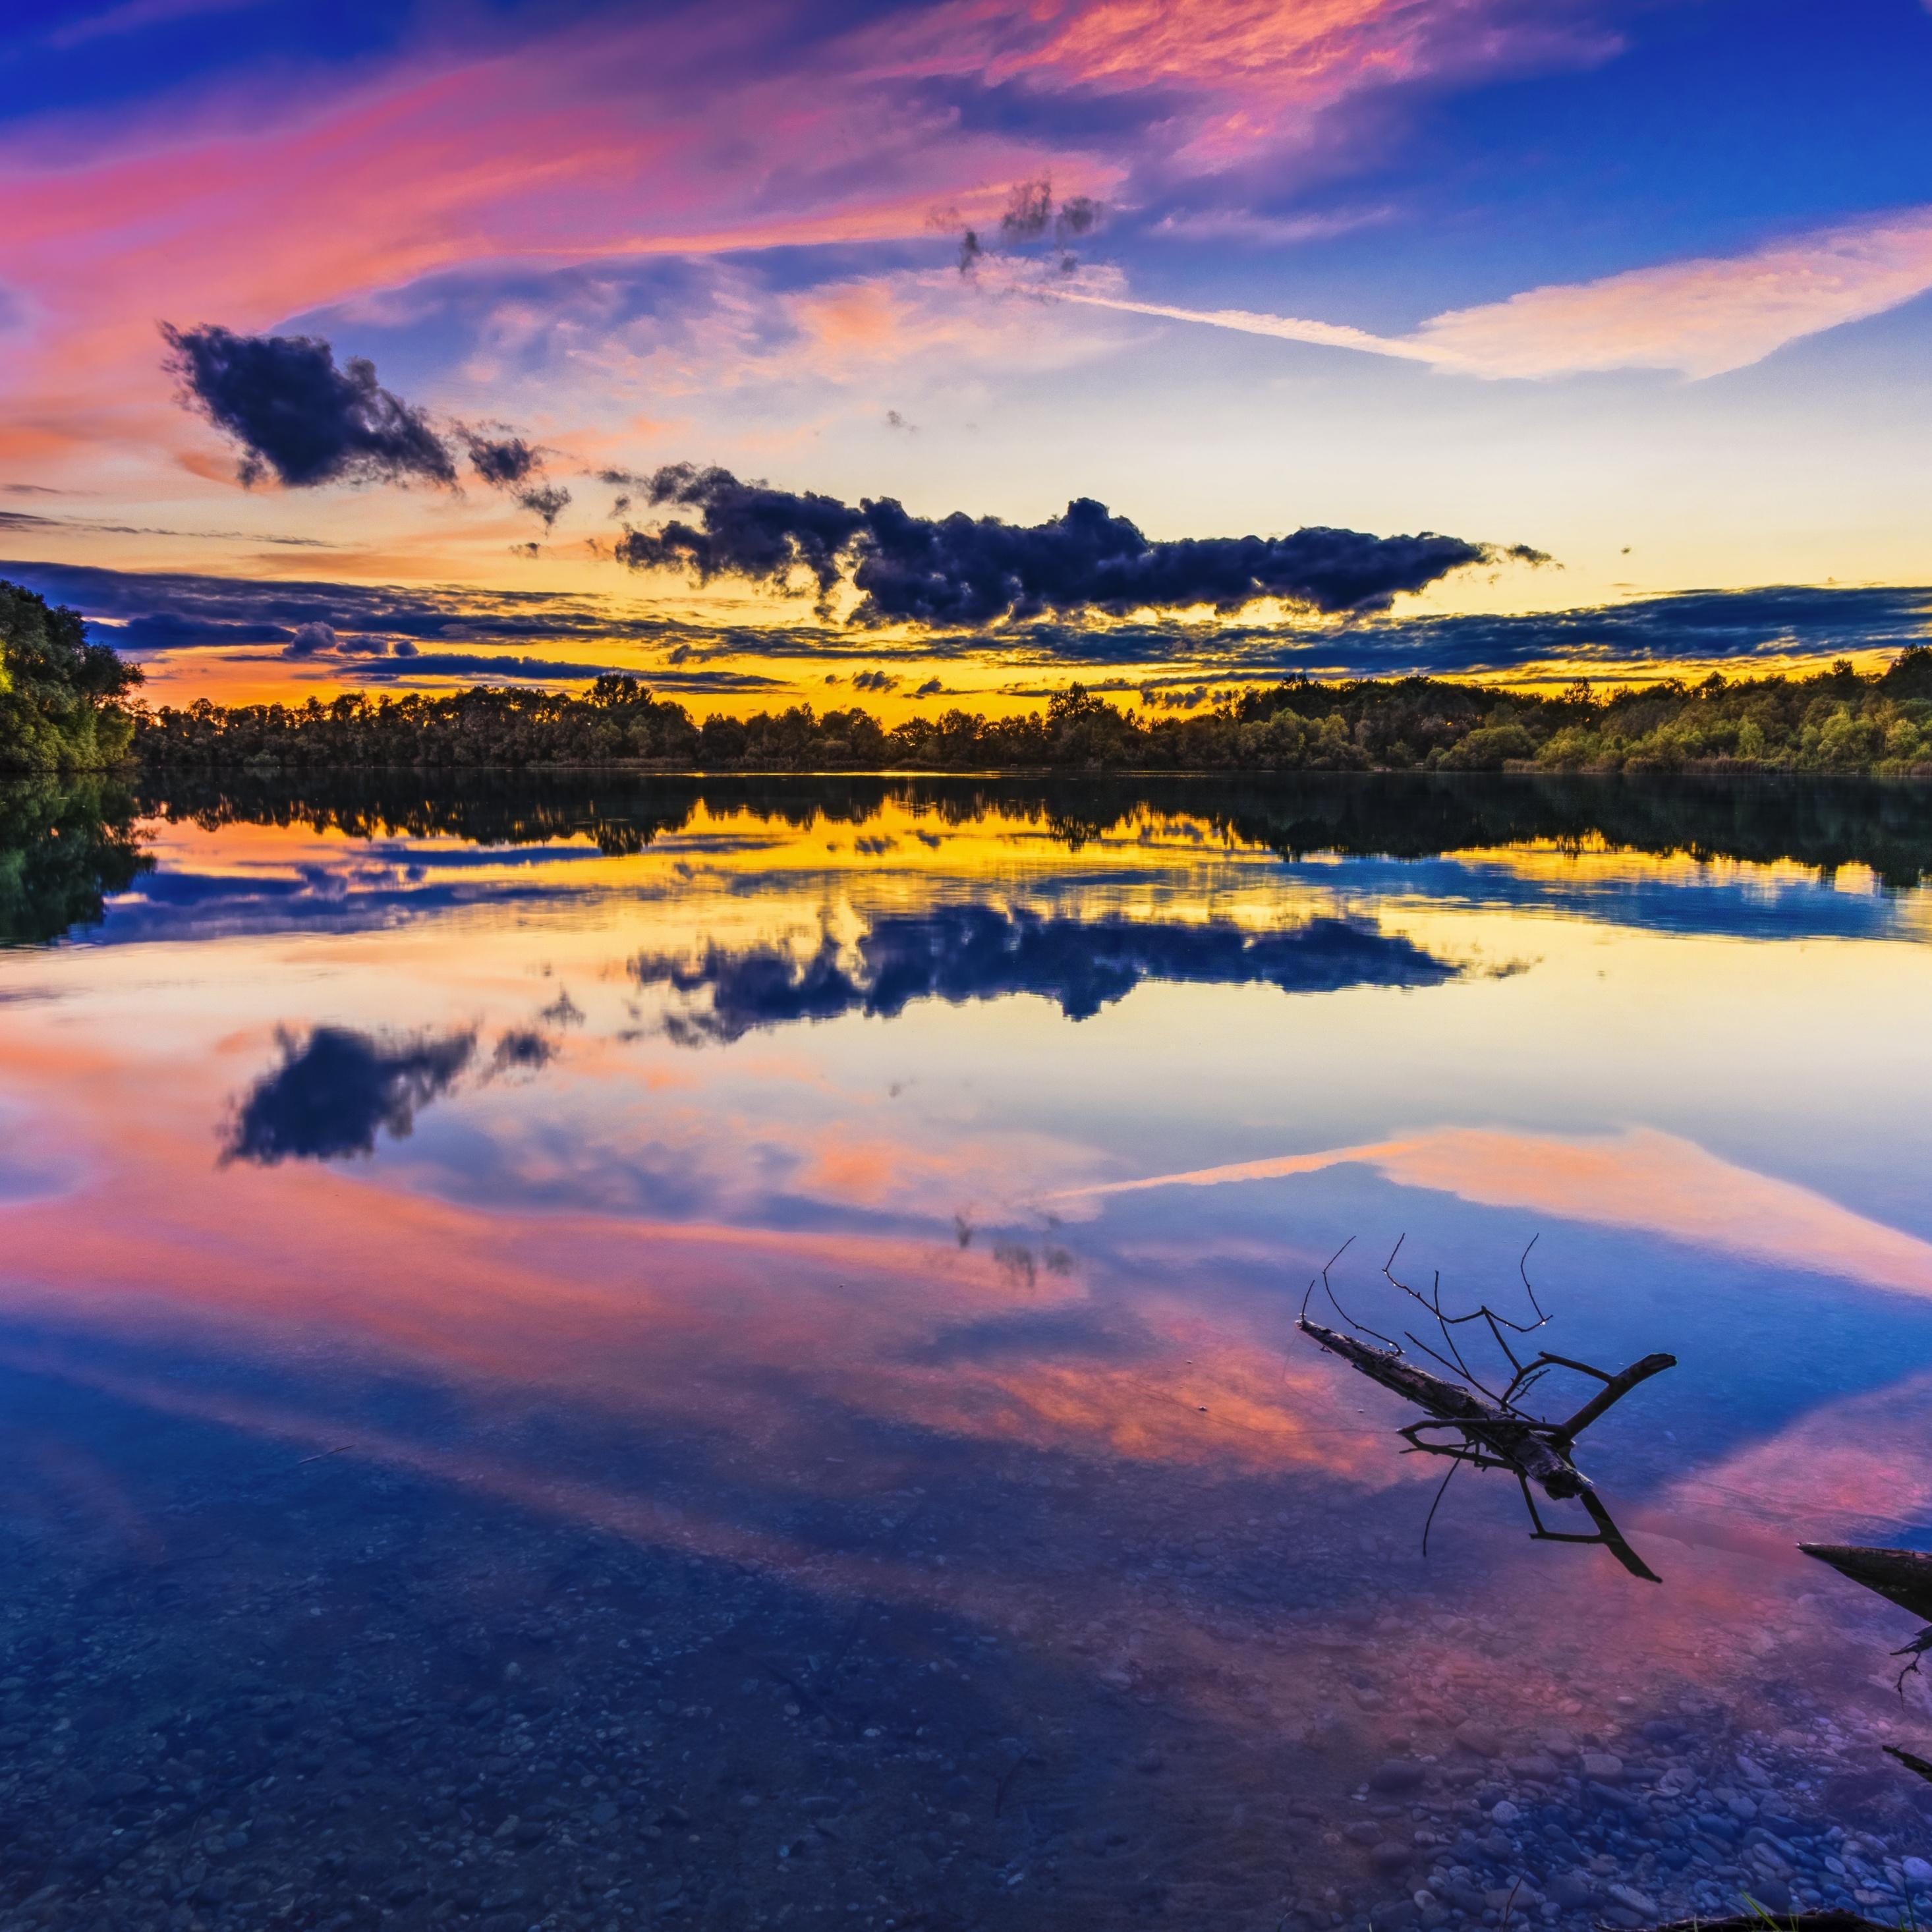 Download 2932x2932 wallpaper lake, sunset, reflections, colorful sky